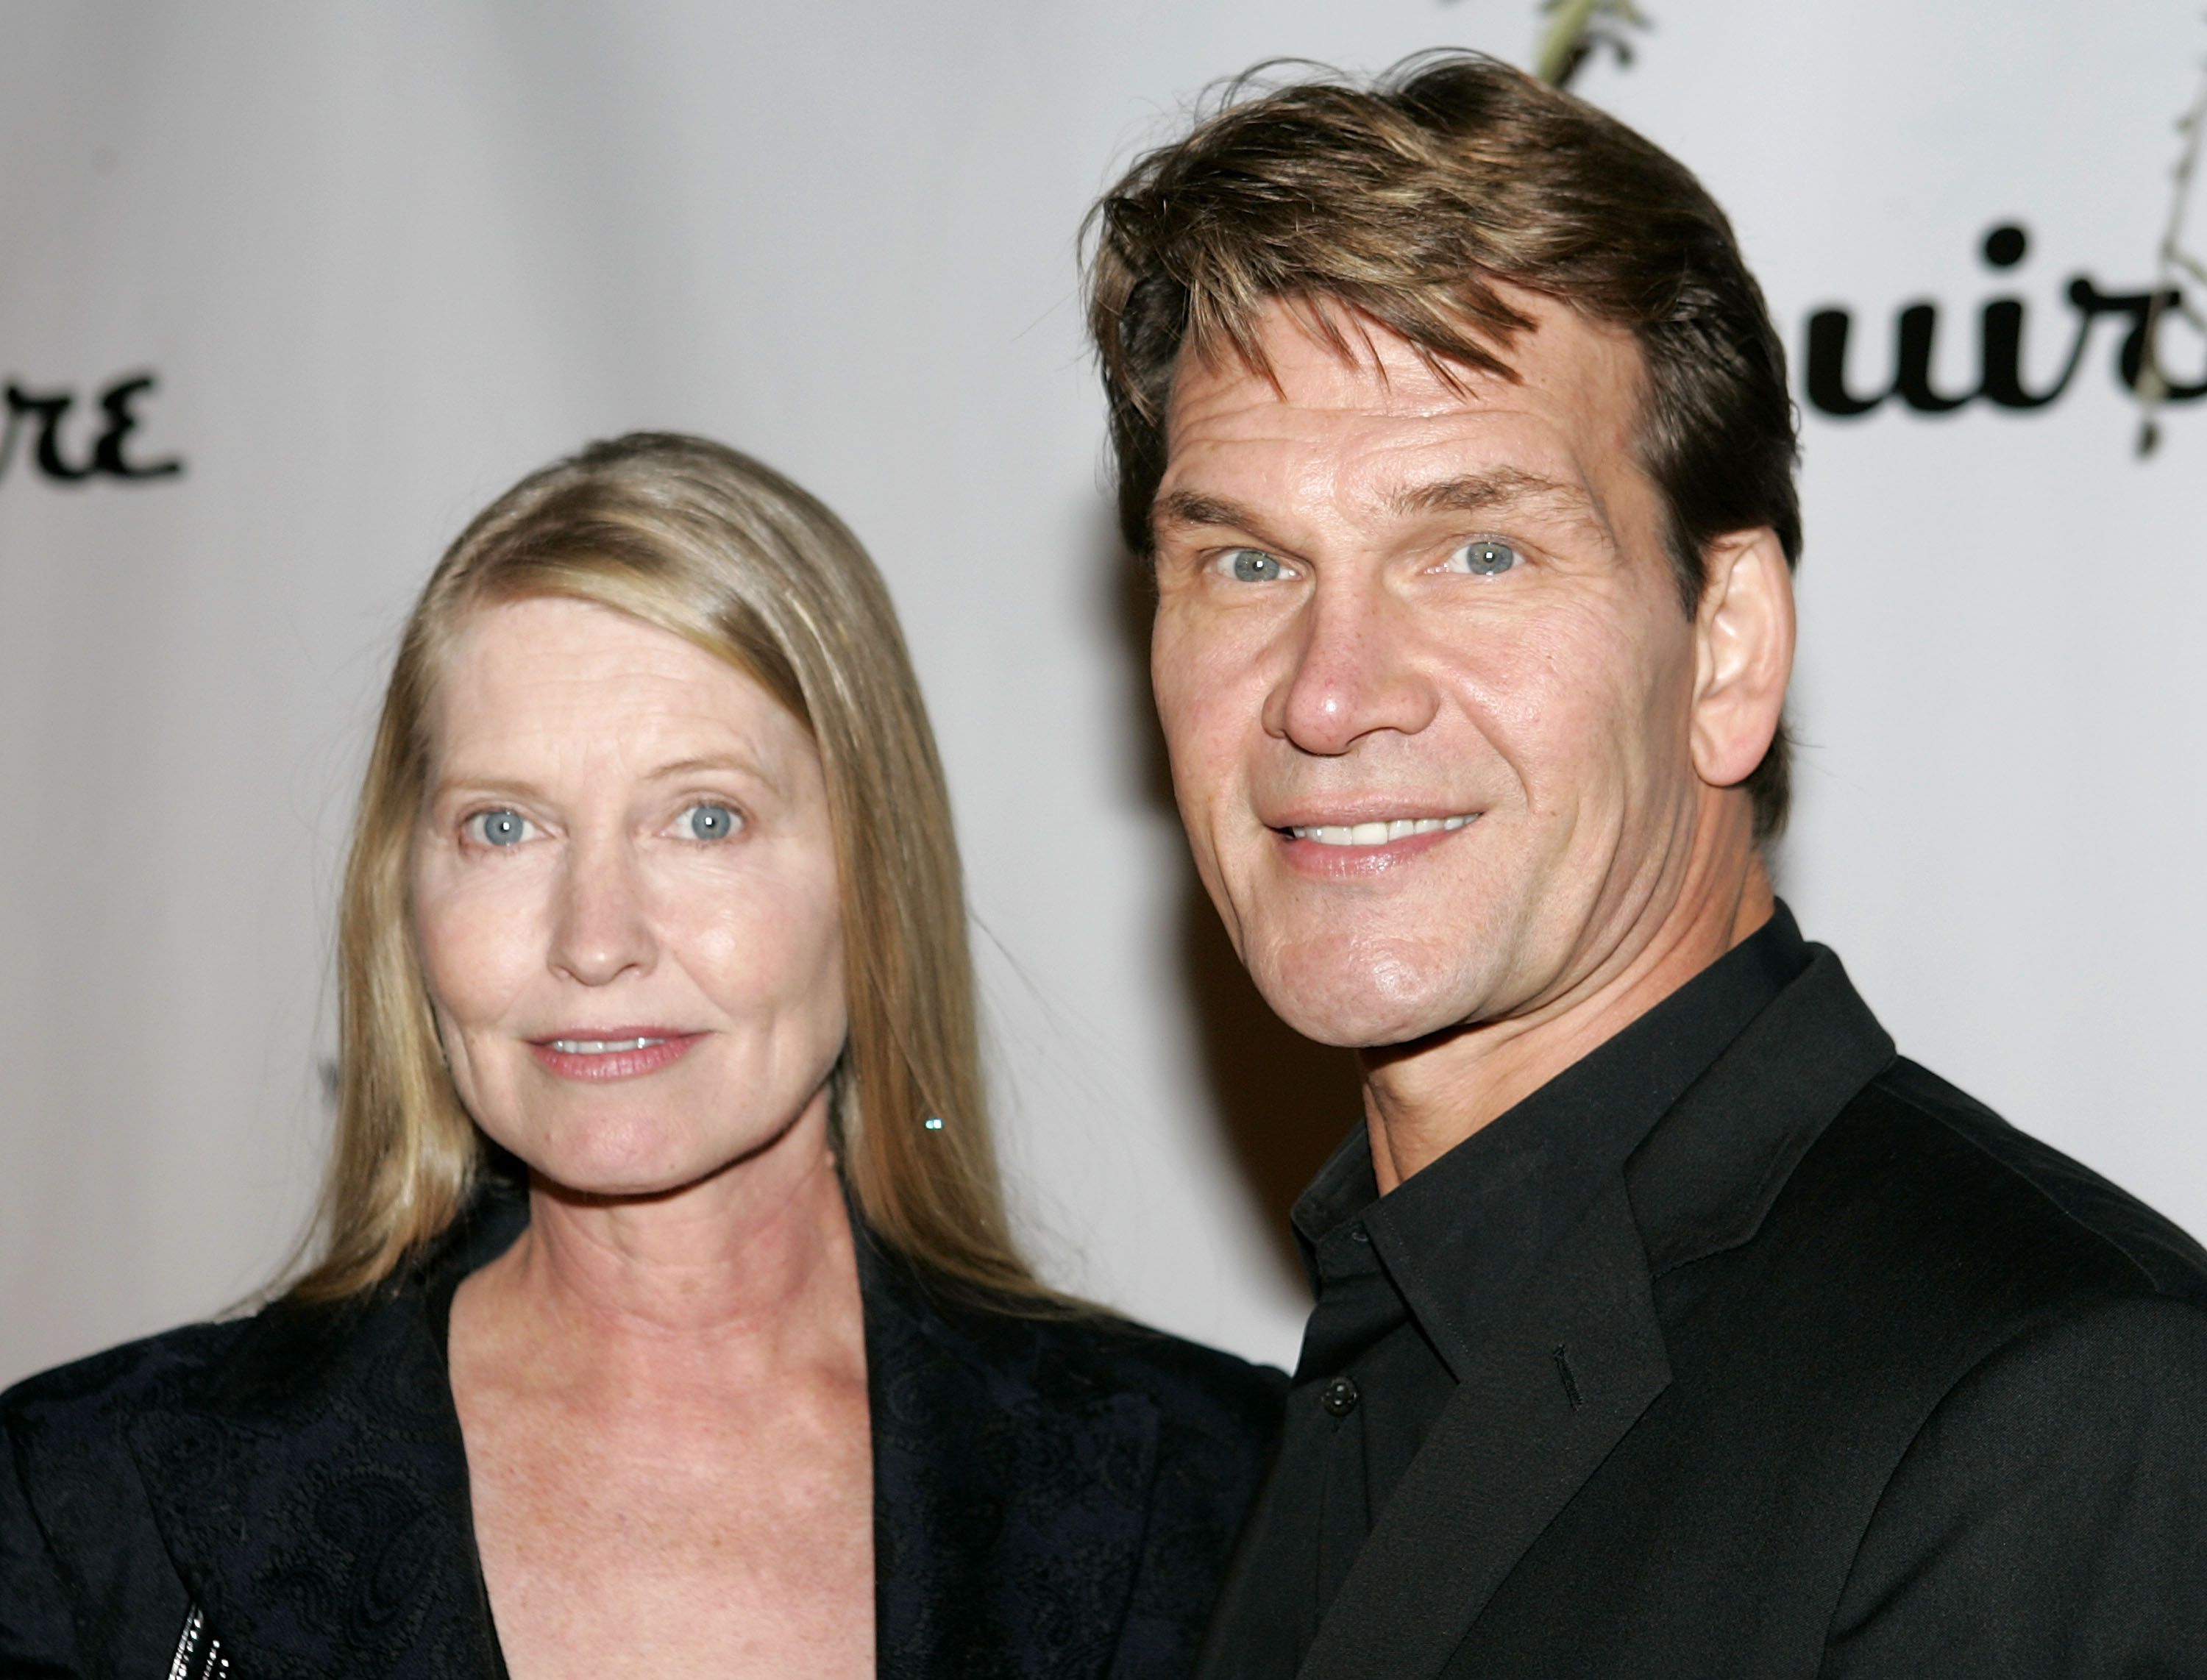 Lisa Niemi and Patrick Swayze at the 2nd Annual Ocean Partners Awards Gala on November 11, 2004, in Los Angeles, California | Photo: Carlo Allegri/Getty Images